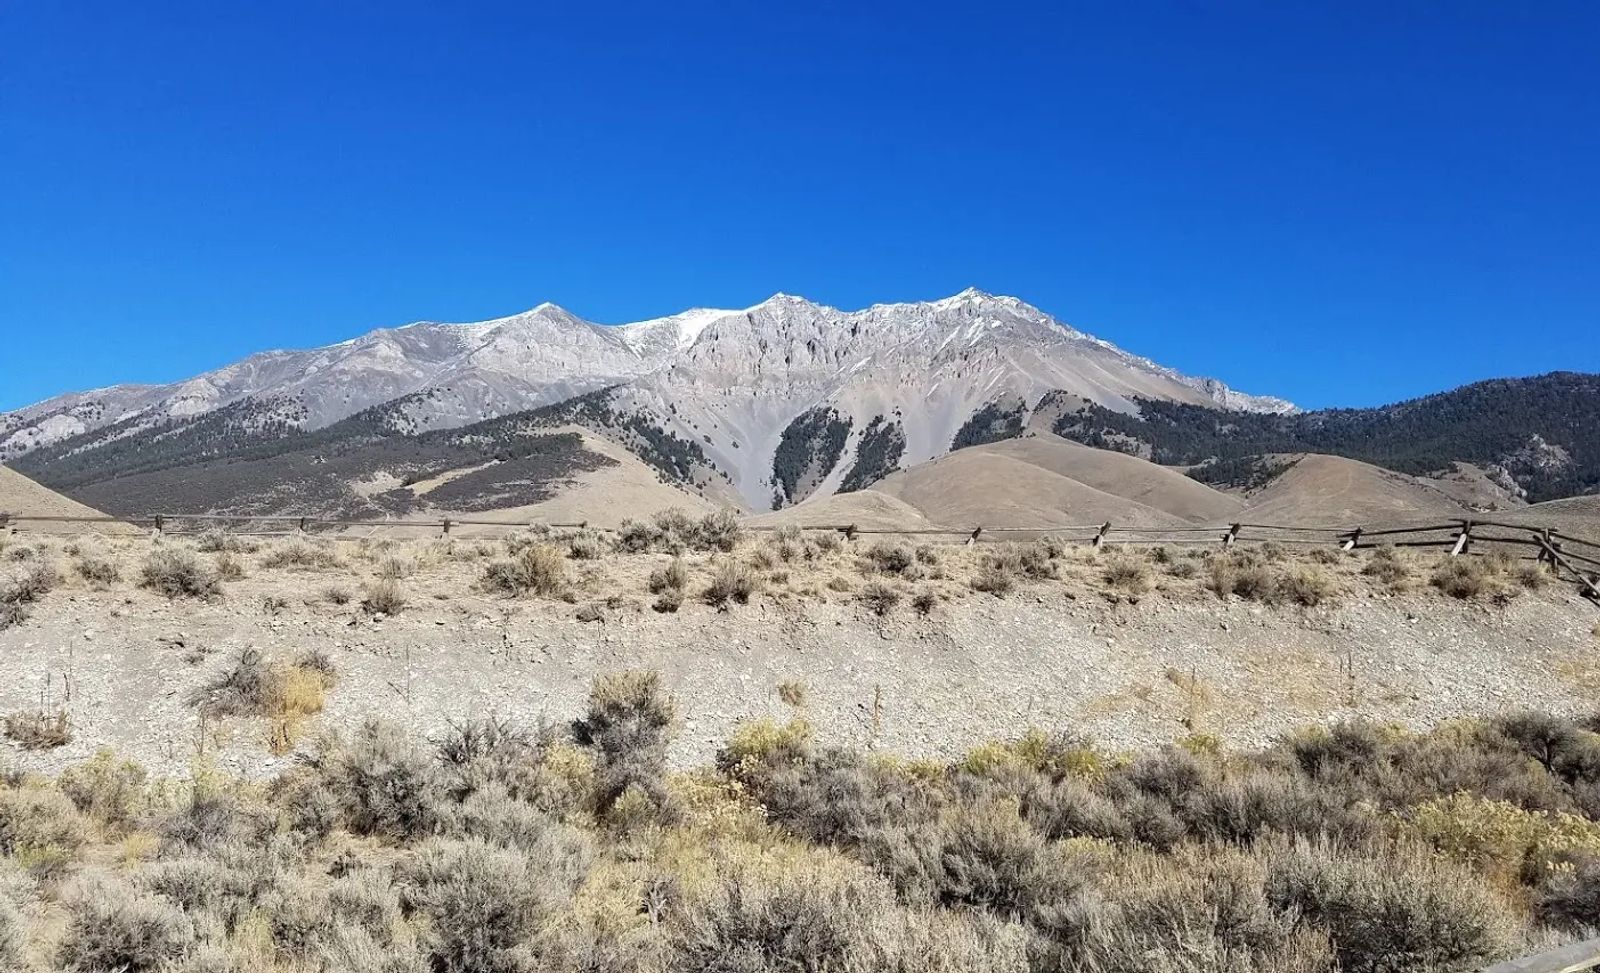 Photo of The scarp that is visible after the latest earthquake near Mackay, Idaho